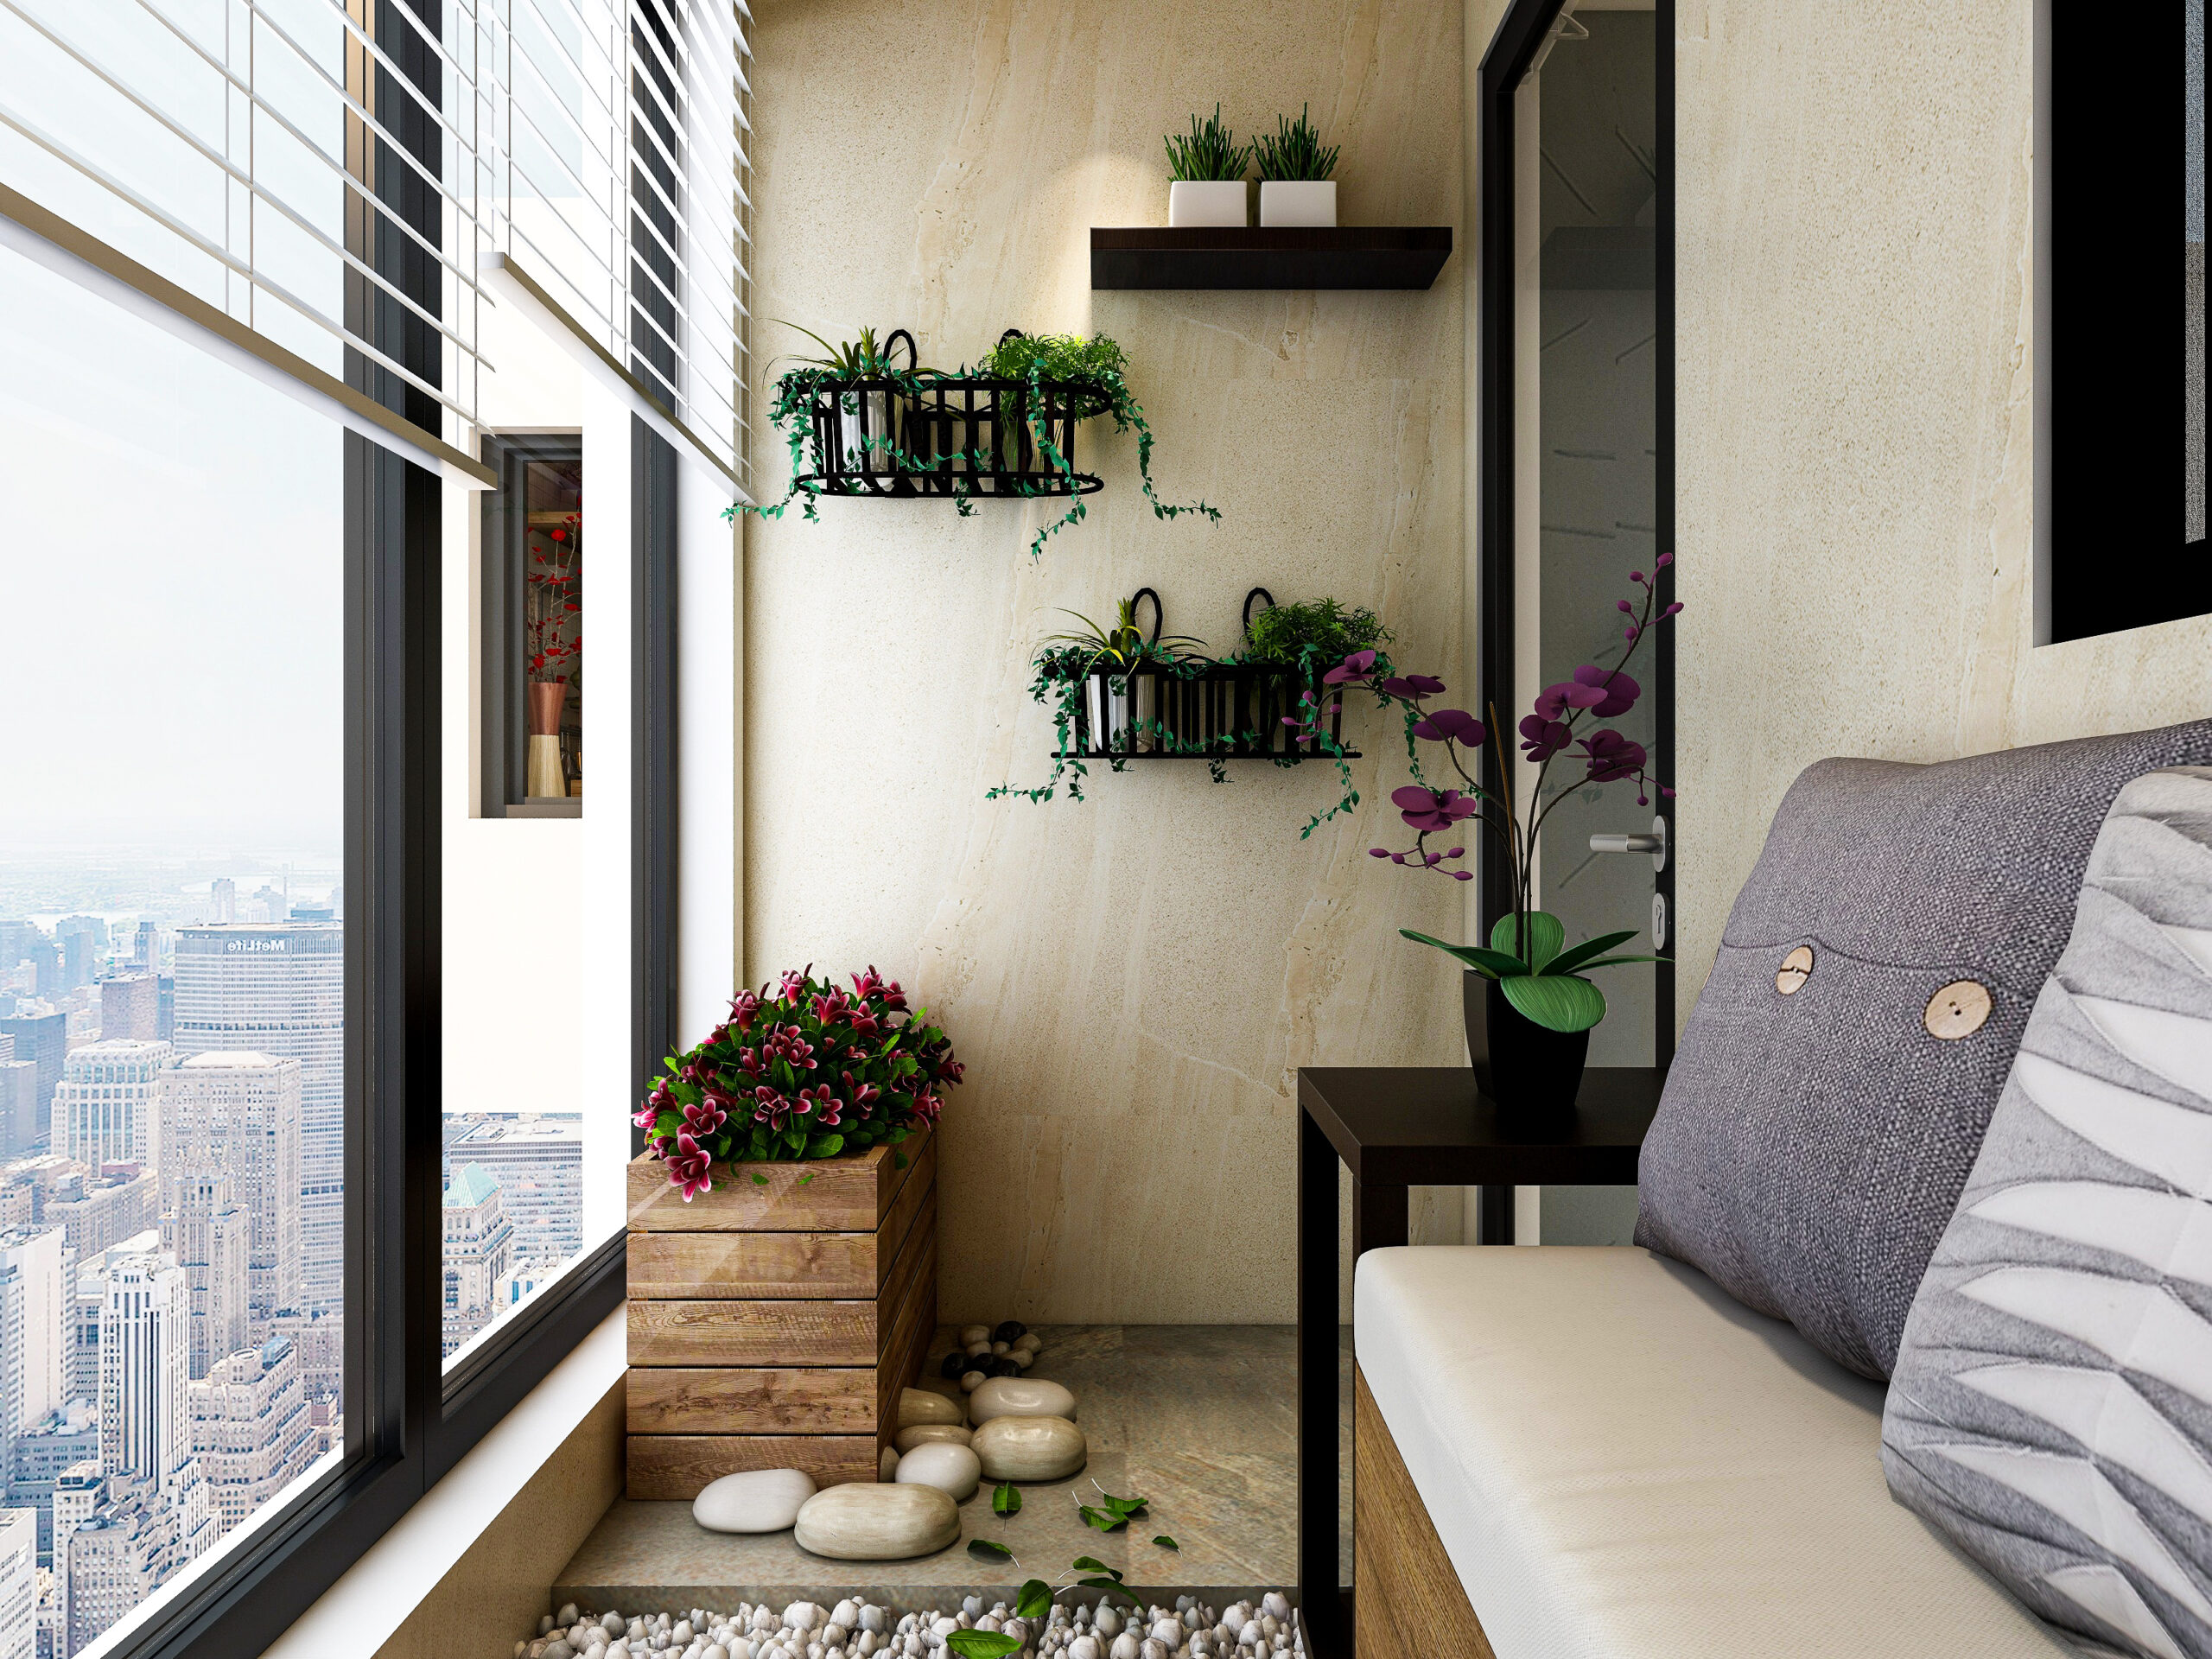 18 insanely gorgeous small apartment balcony ideas you’ll want to try ...